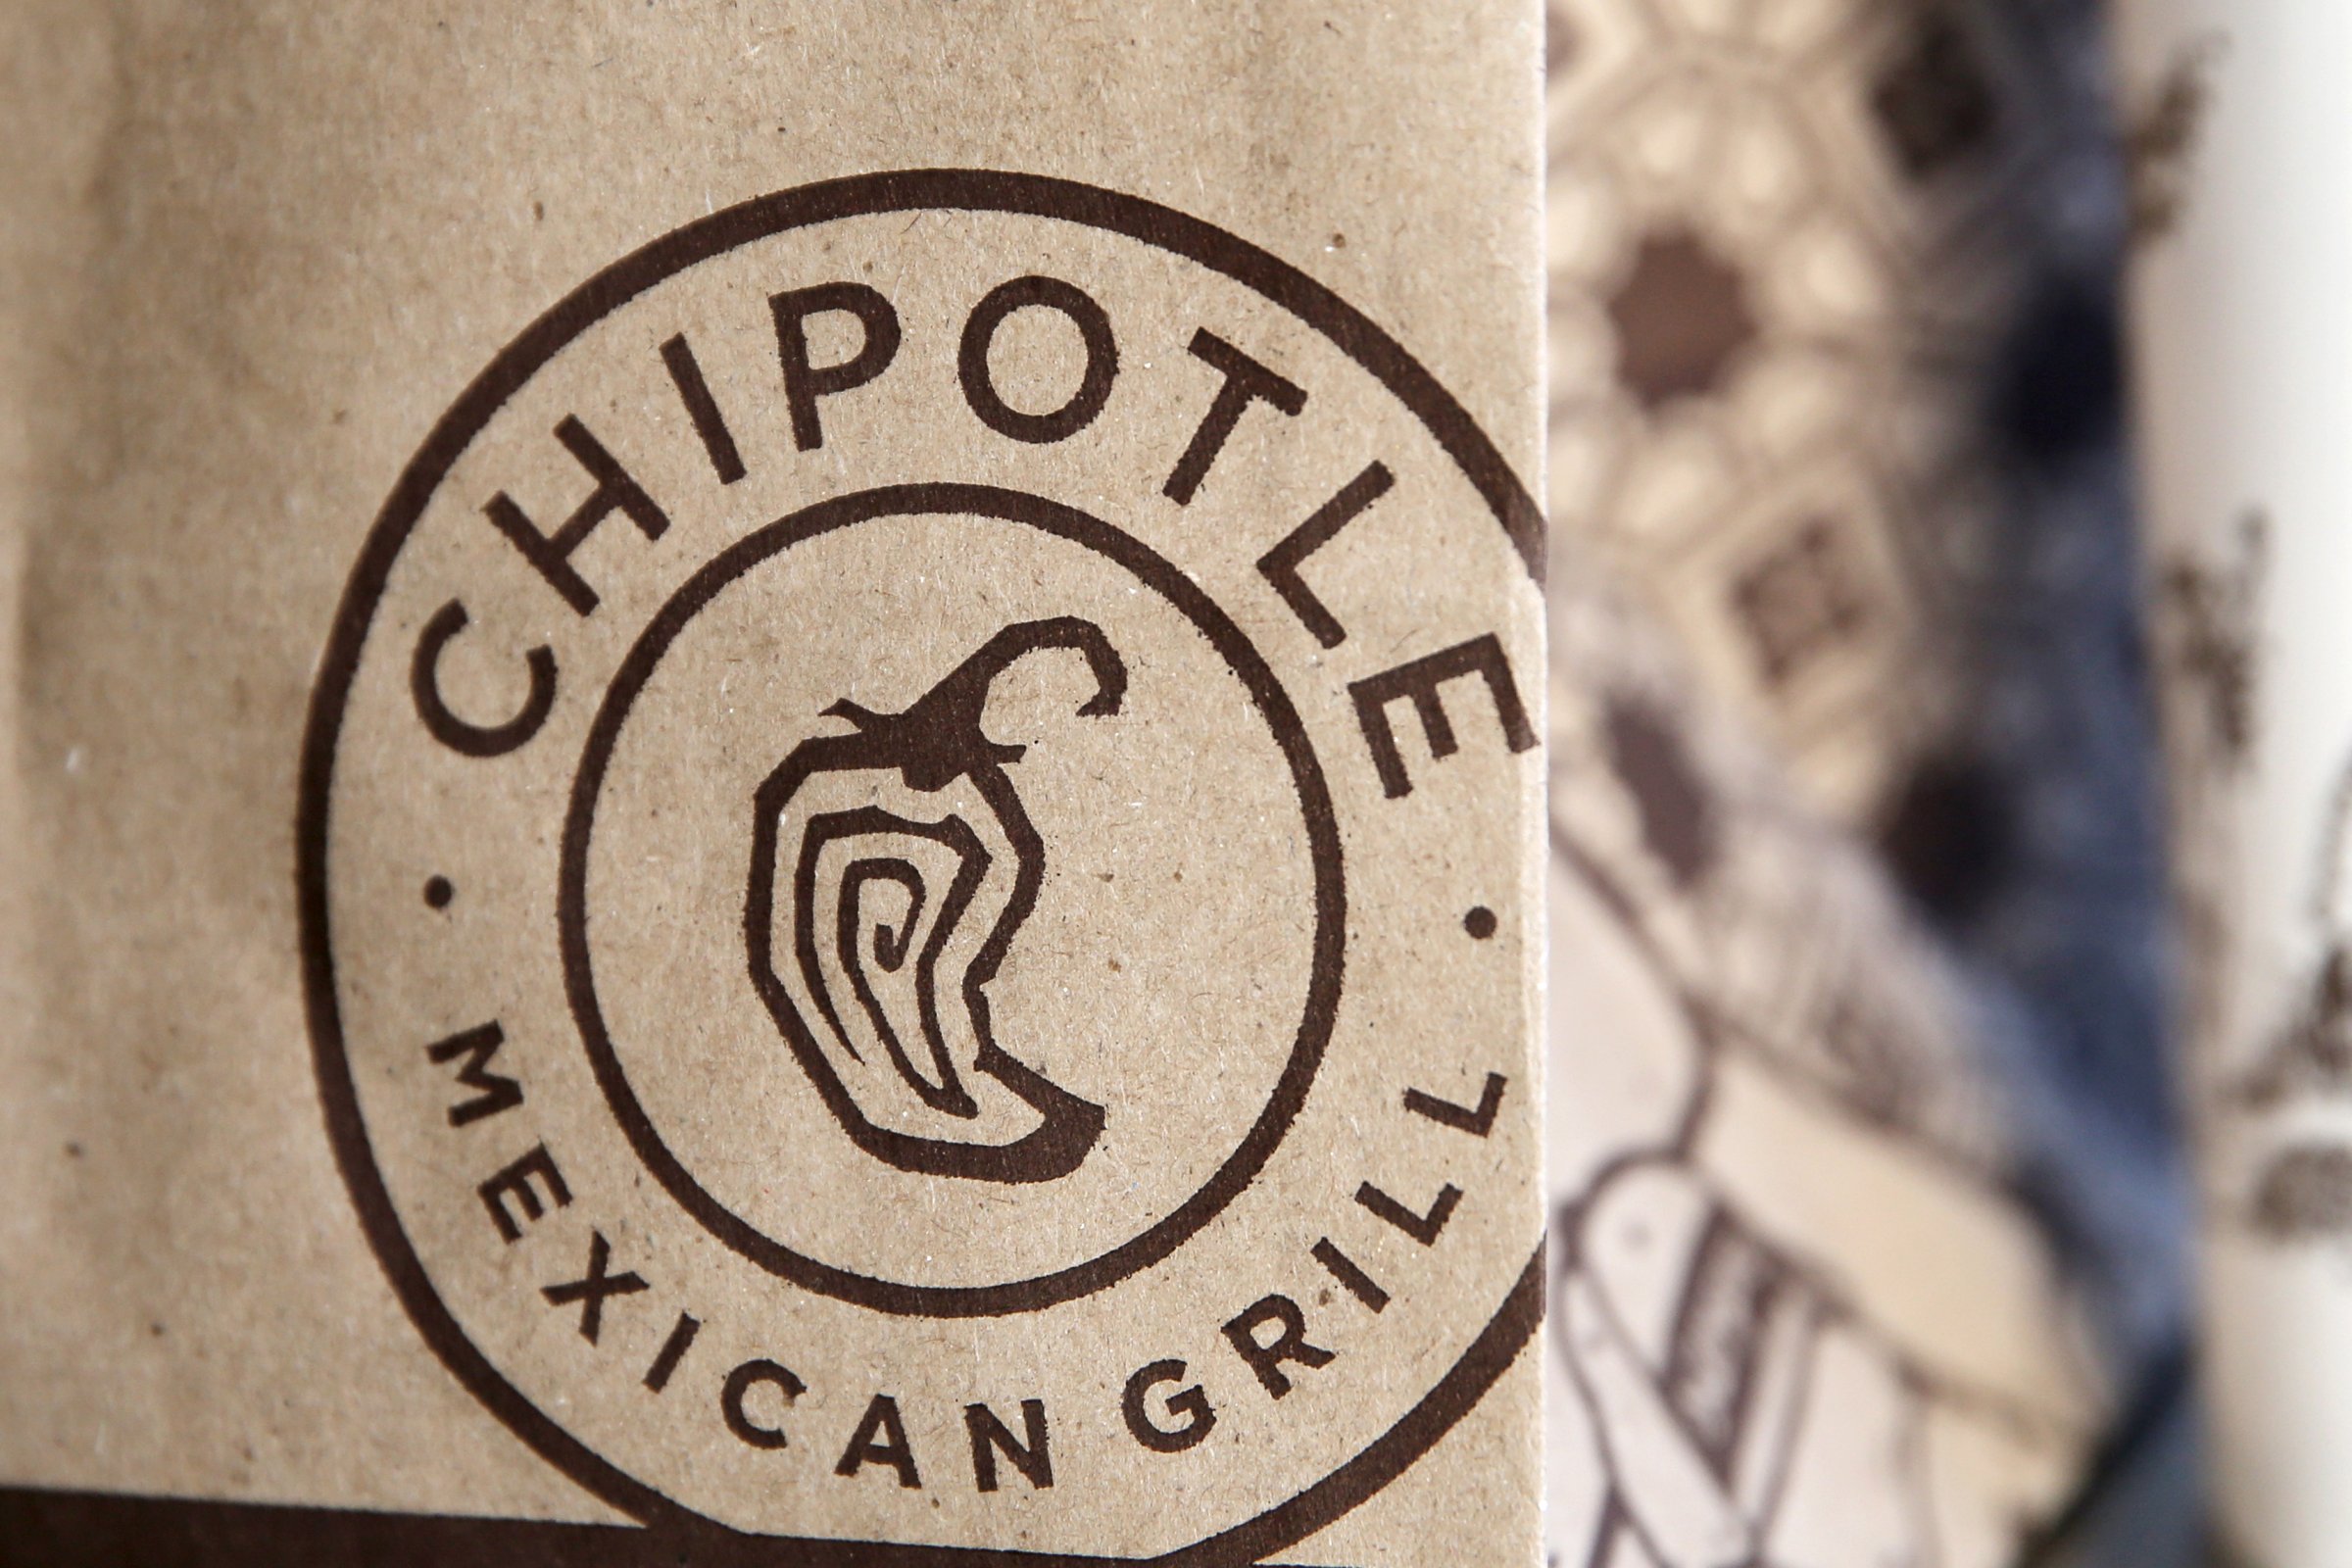 A Chipotle logo is seen on one of their bags in Manhattan, New York